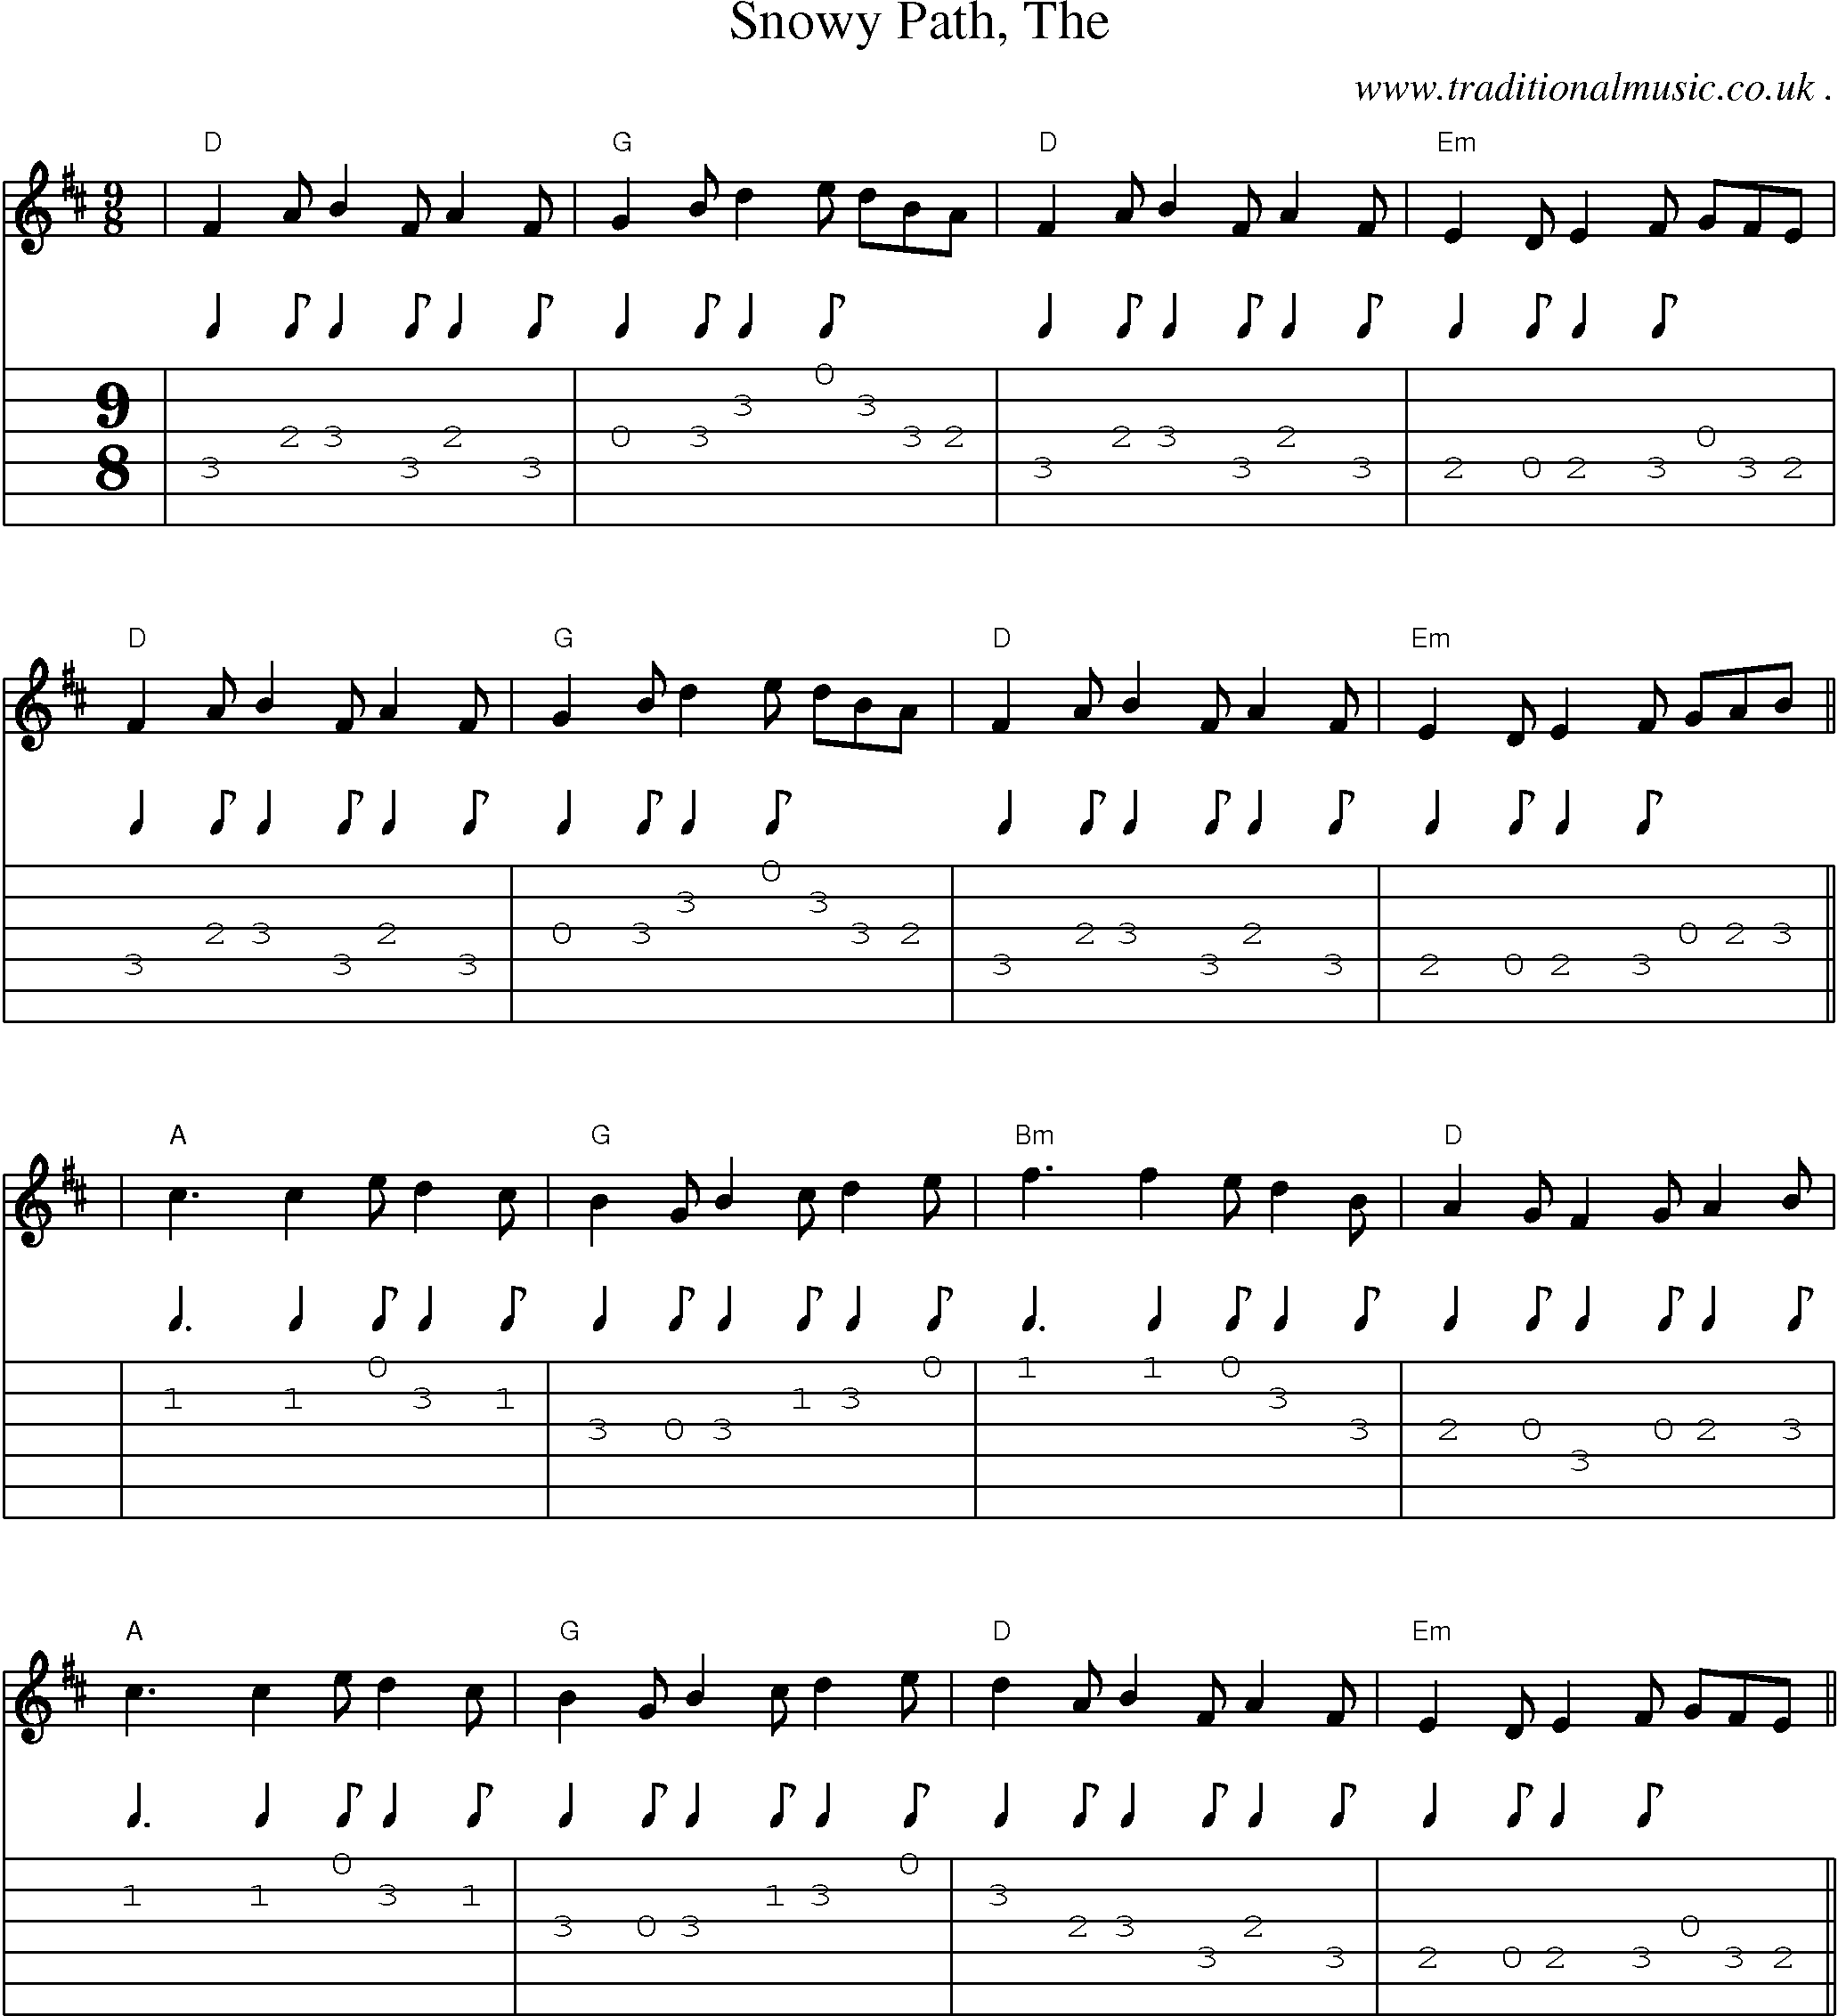 Music Score and Guitar Tabs for Snowy Path The